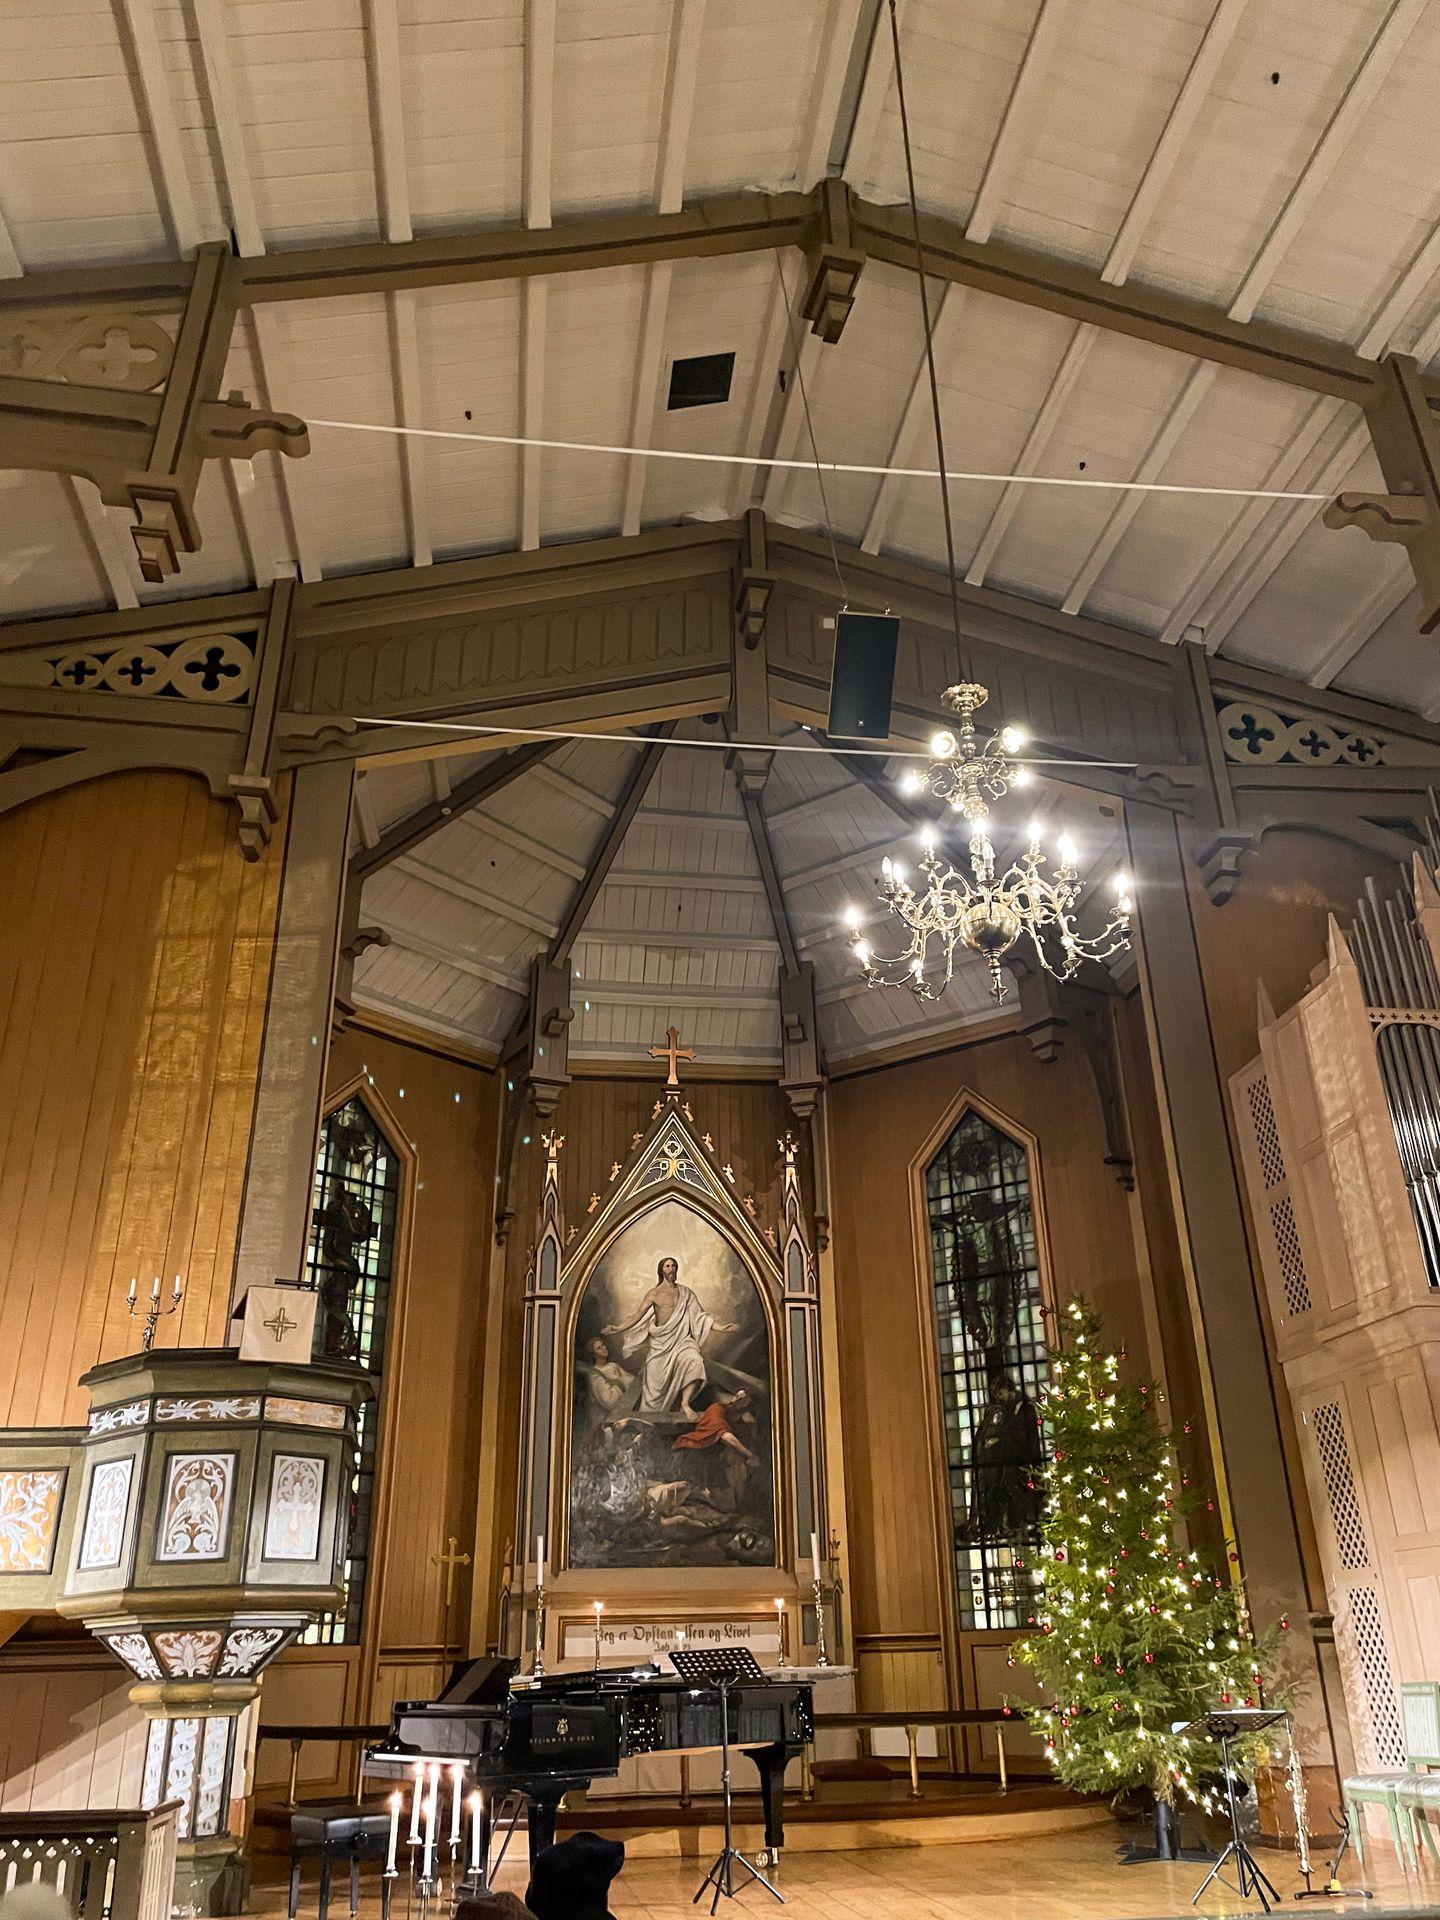 Inside of the Tromso Cathedral. There is religious artwork, a chandelier and a Christmas tree